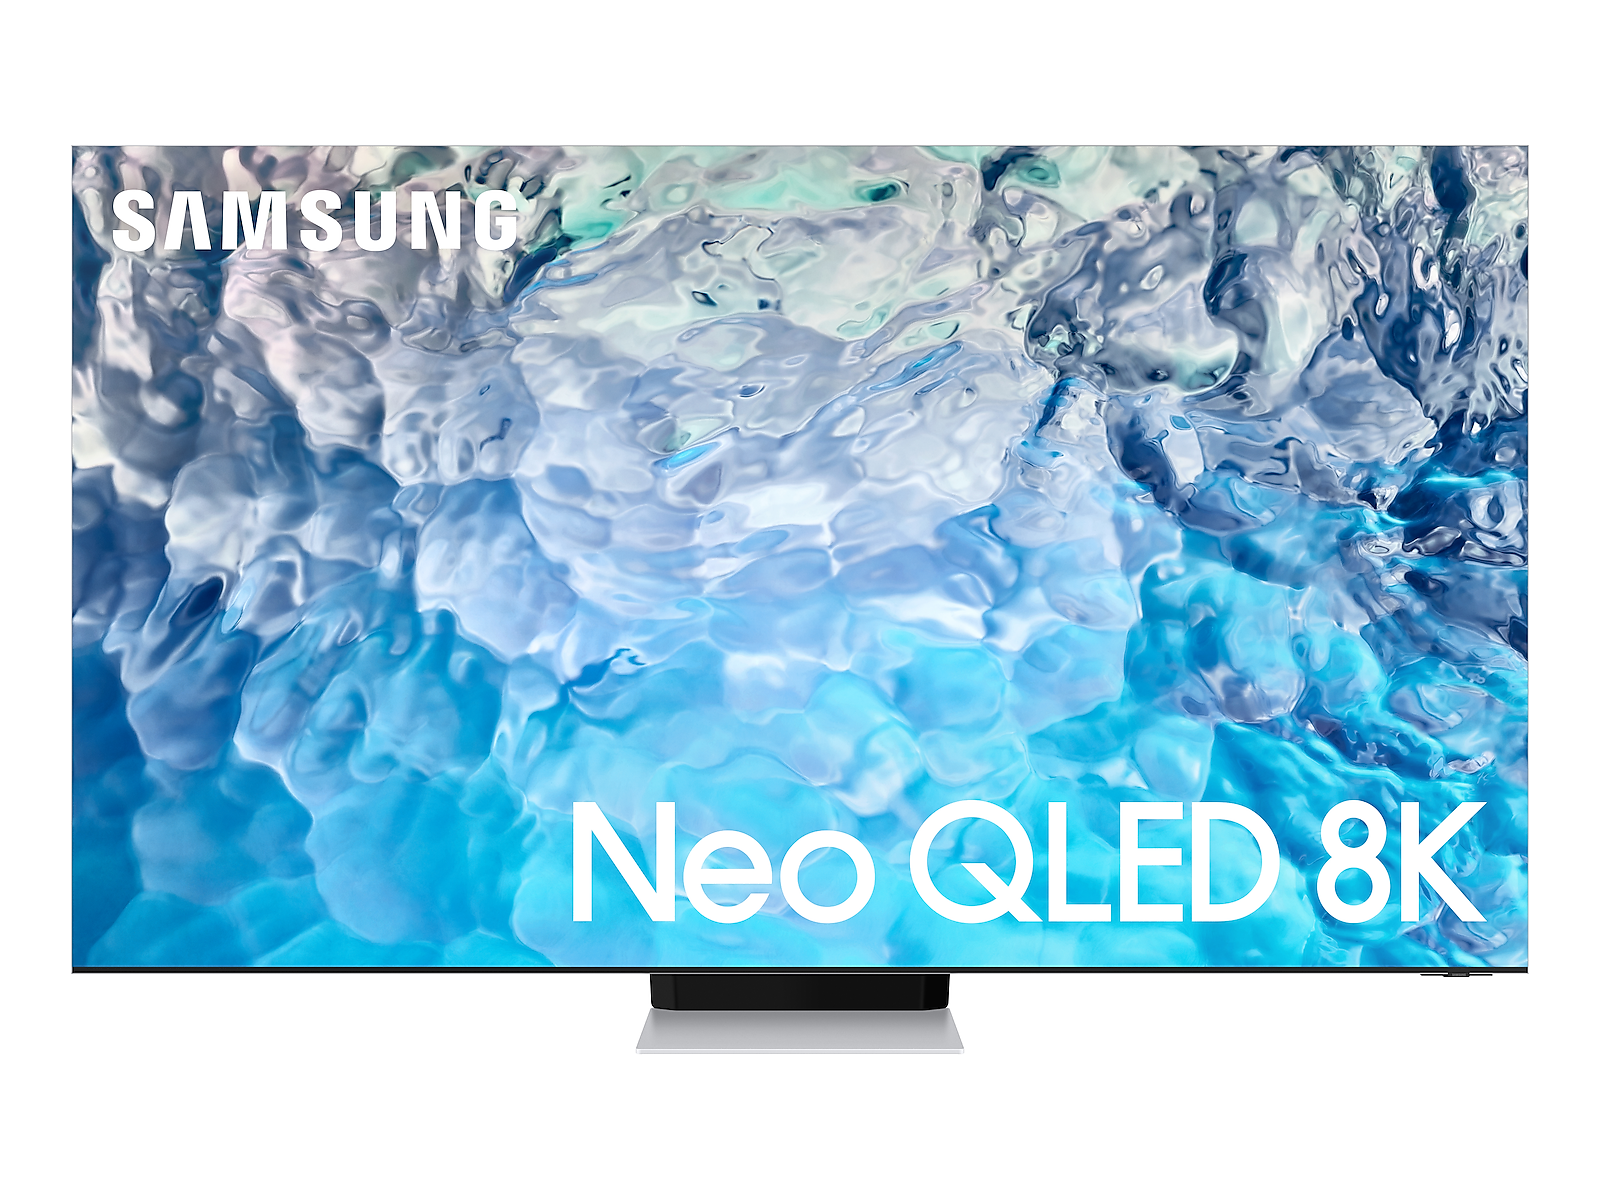 85" Class QN900B Samsung Neo QLED 8K Smart TV in Stainless Steel (2022)